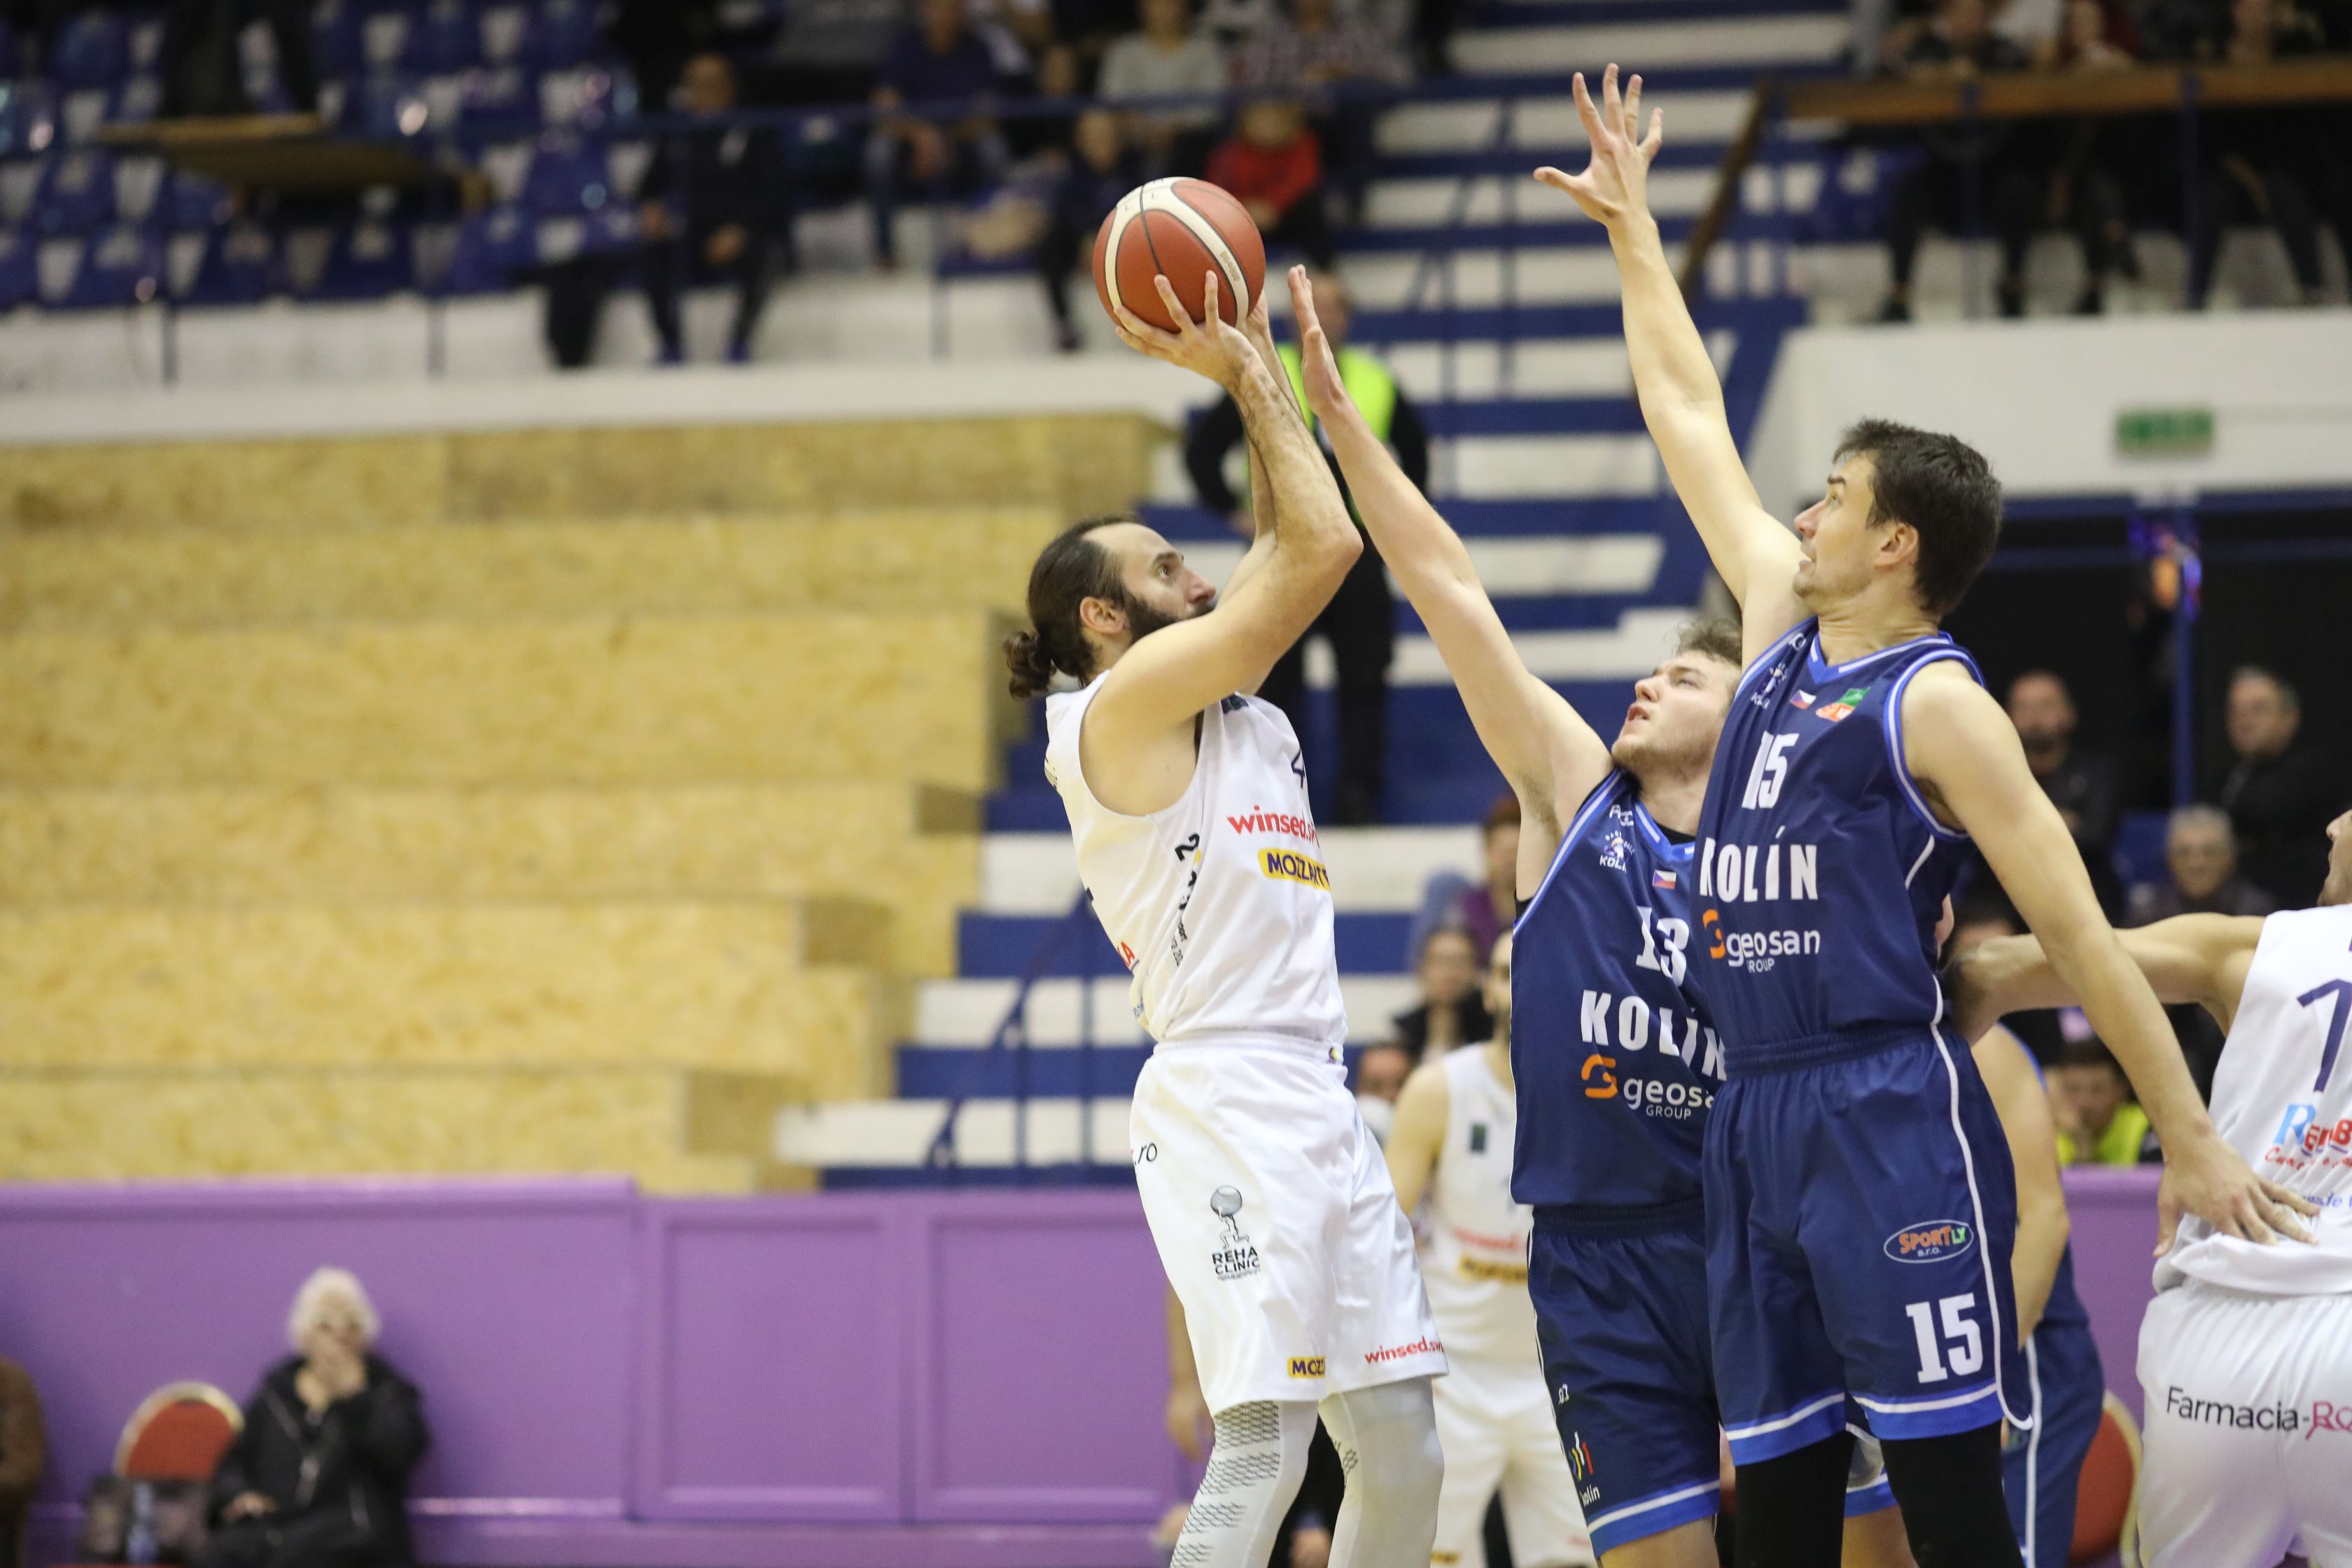 The clash of undefeated teams went better for Timisoara